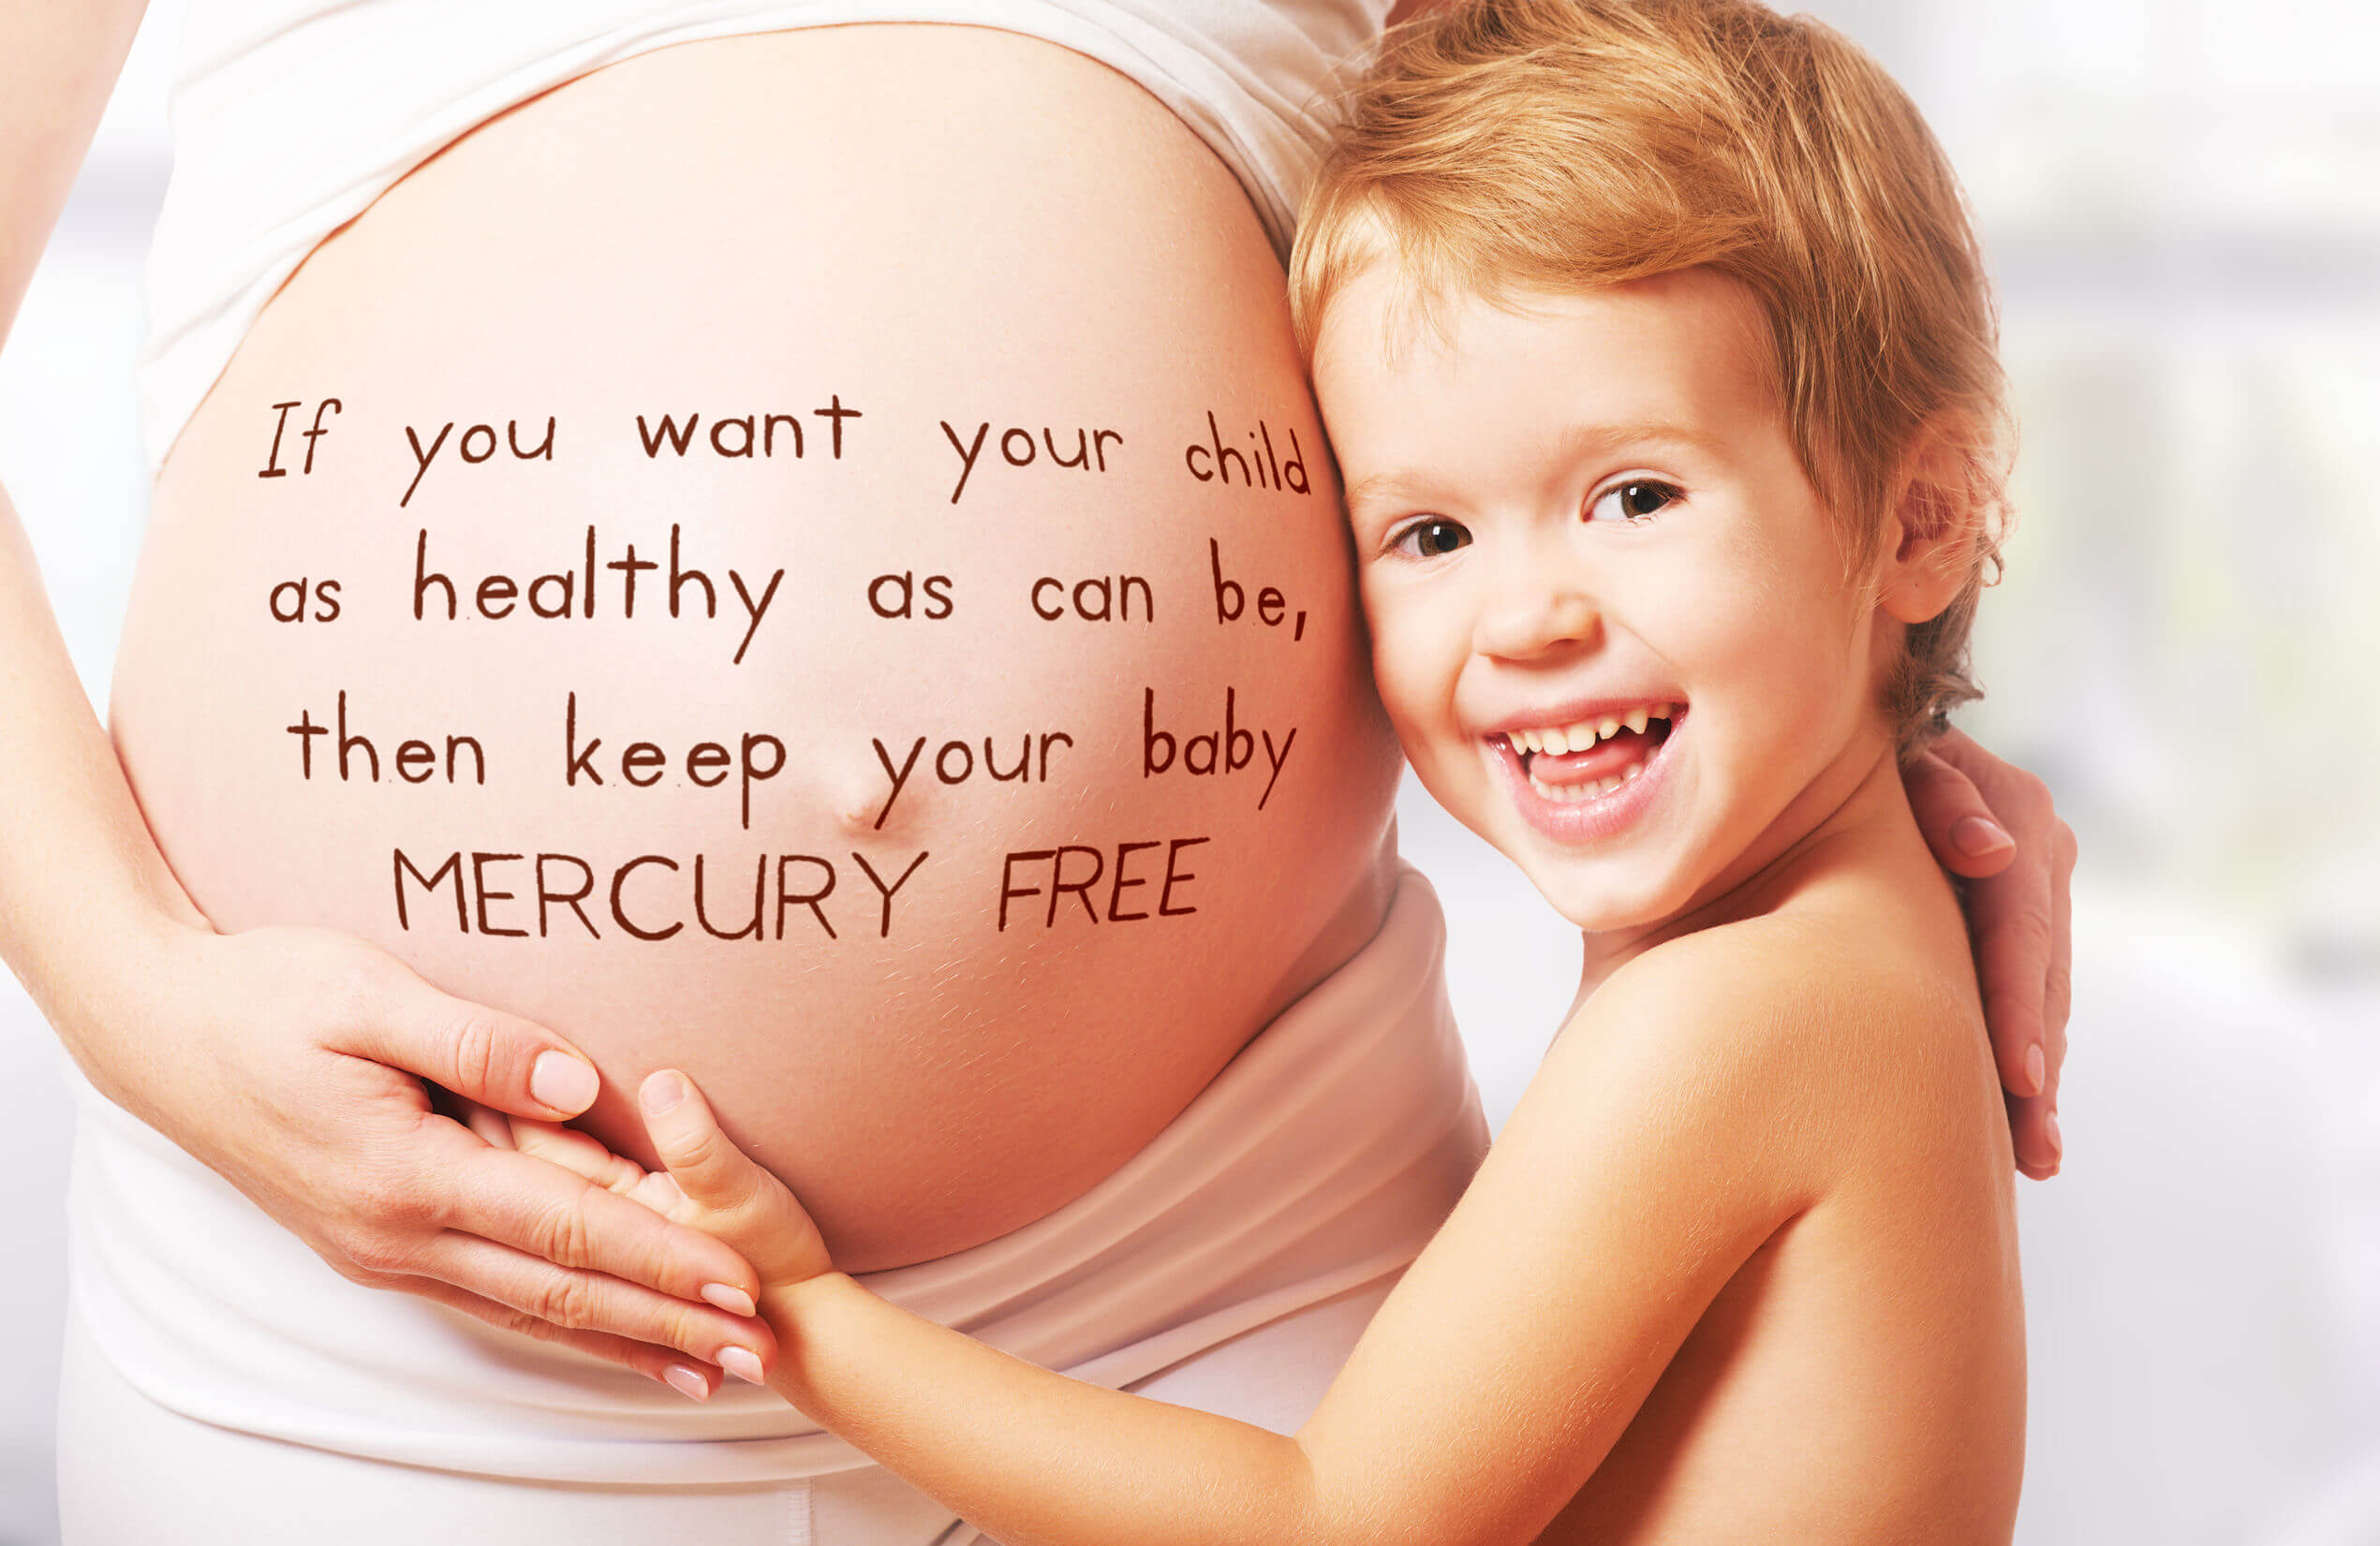 Mercury in Vaccines - 10 Lies About The Safety of Thimerosal